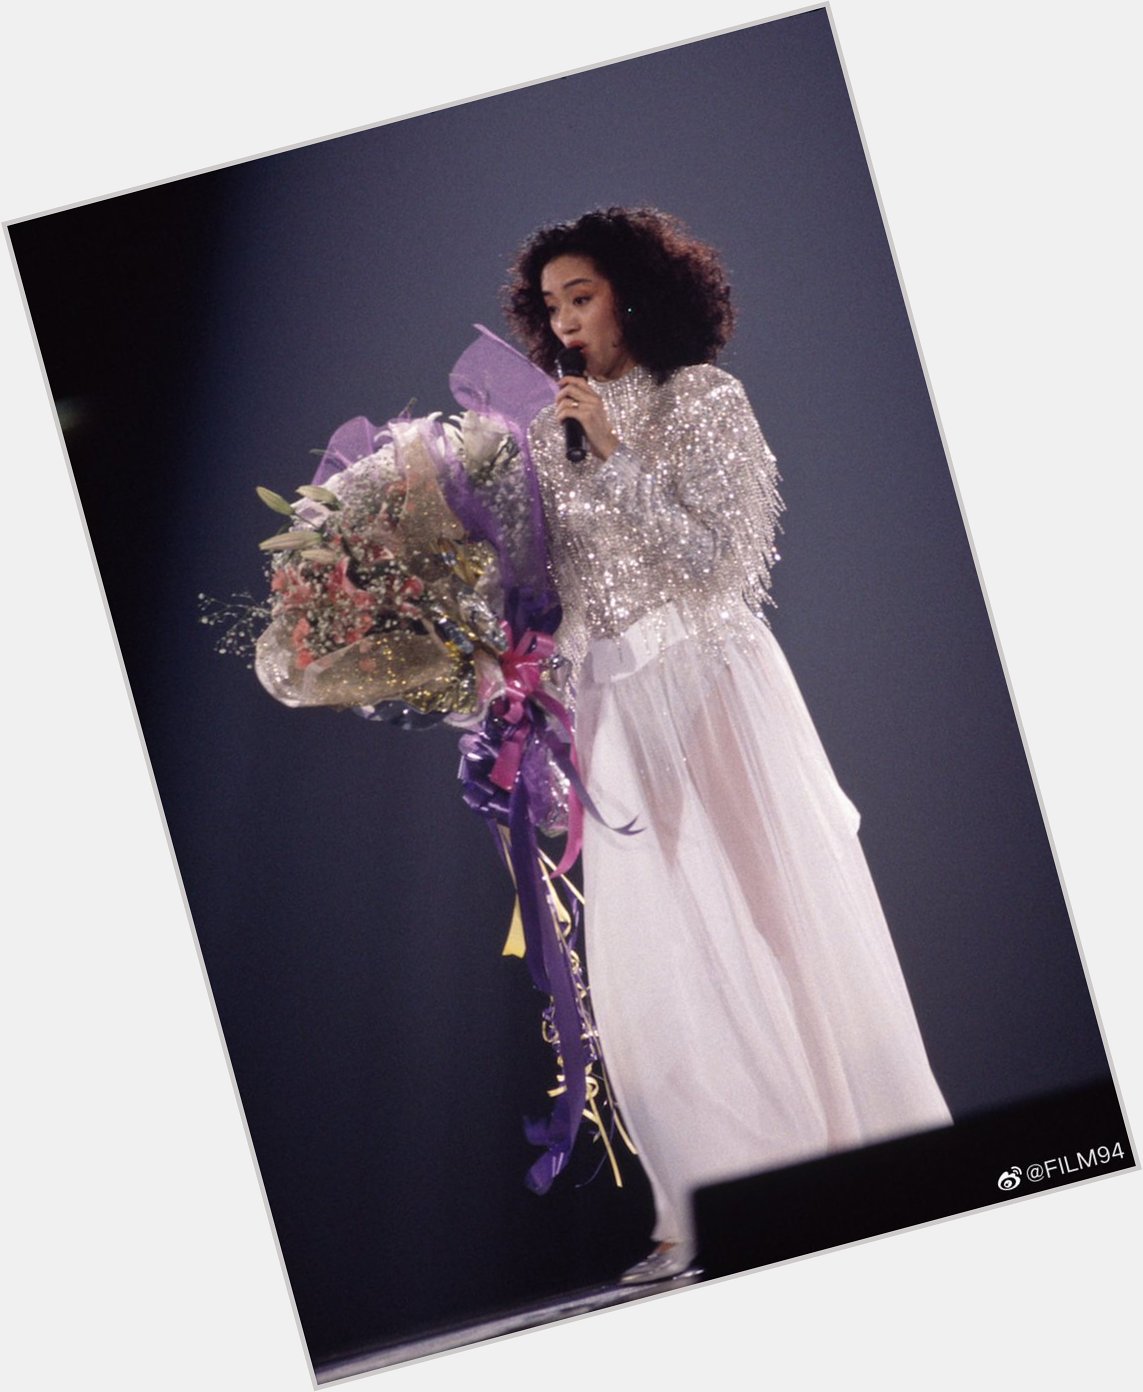 Happy birthday our dearest diva anita mui! your legacy lives on forever and rest easy my love <33 